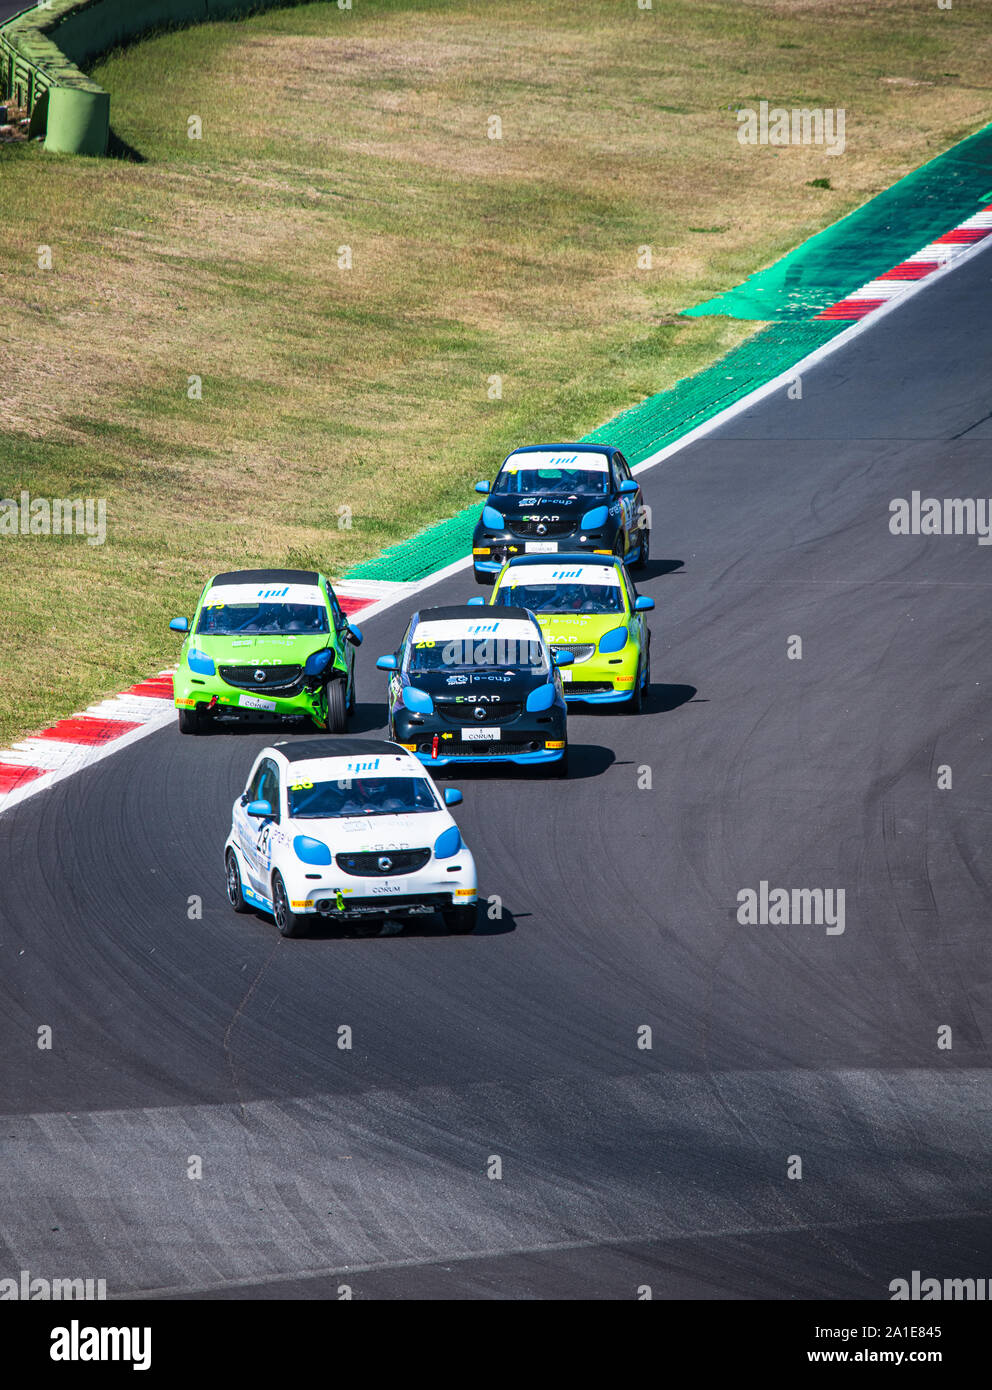 Vallelunga, Italy september 14 2019. High angle view of asphalt circuit with Smart electric engine racing cars in group action and overtaking during t Stock Photo